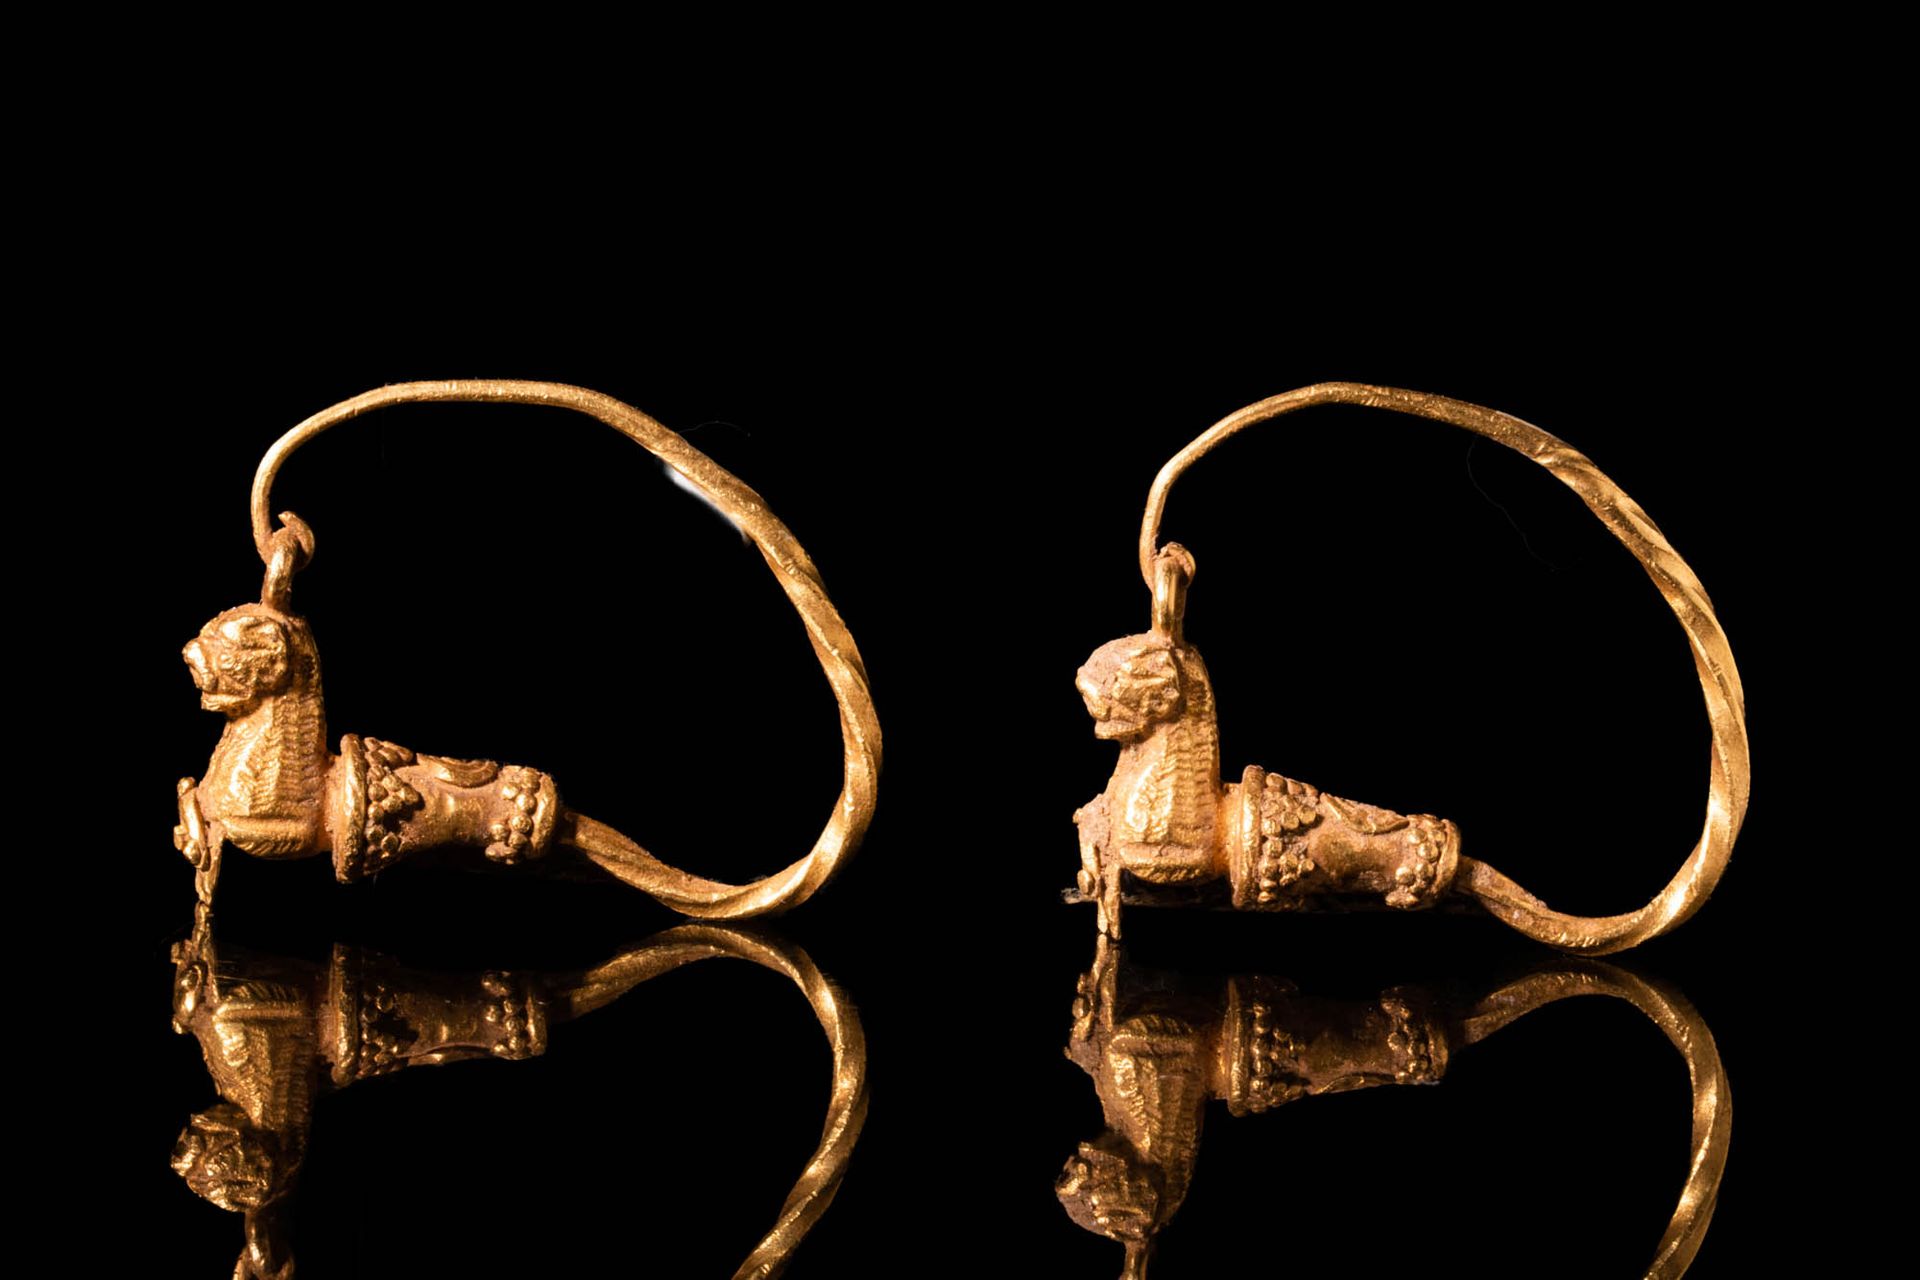 HELLENISTIC GOLD EARRINGS WITH ANIMAL PROTOMES Ca. 400 - 200 BC.
A pair of 21 ct&hellip;